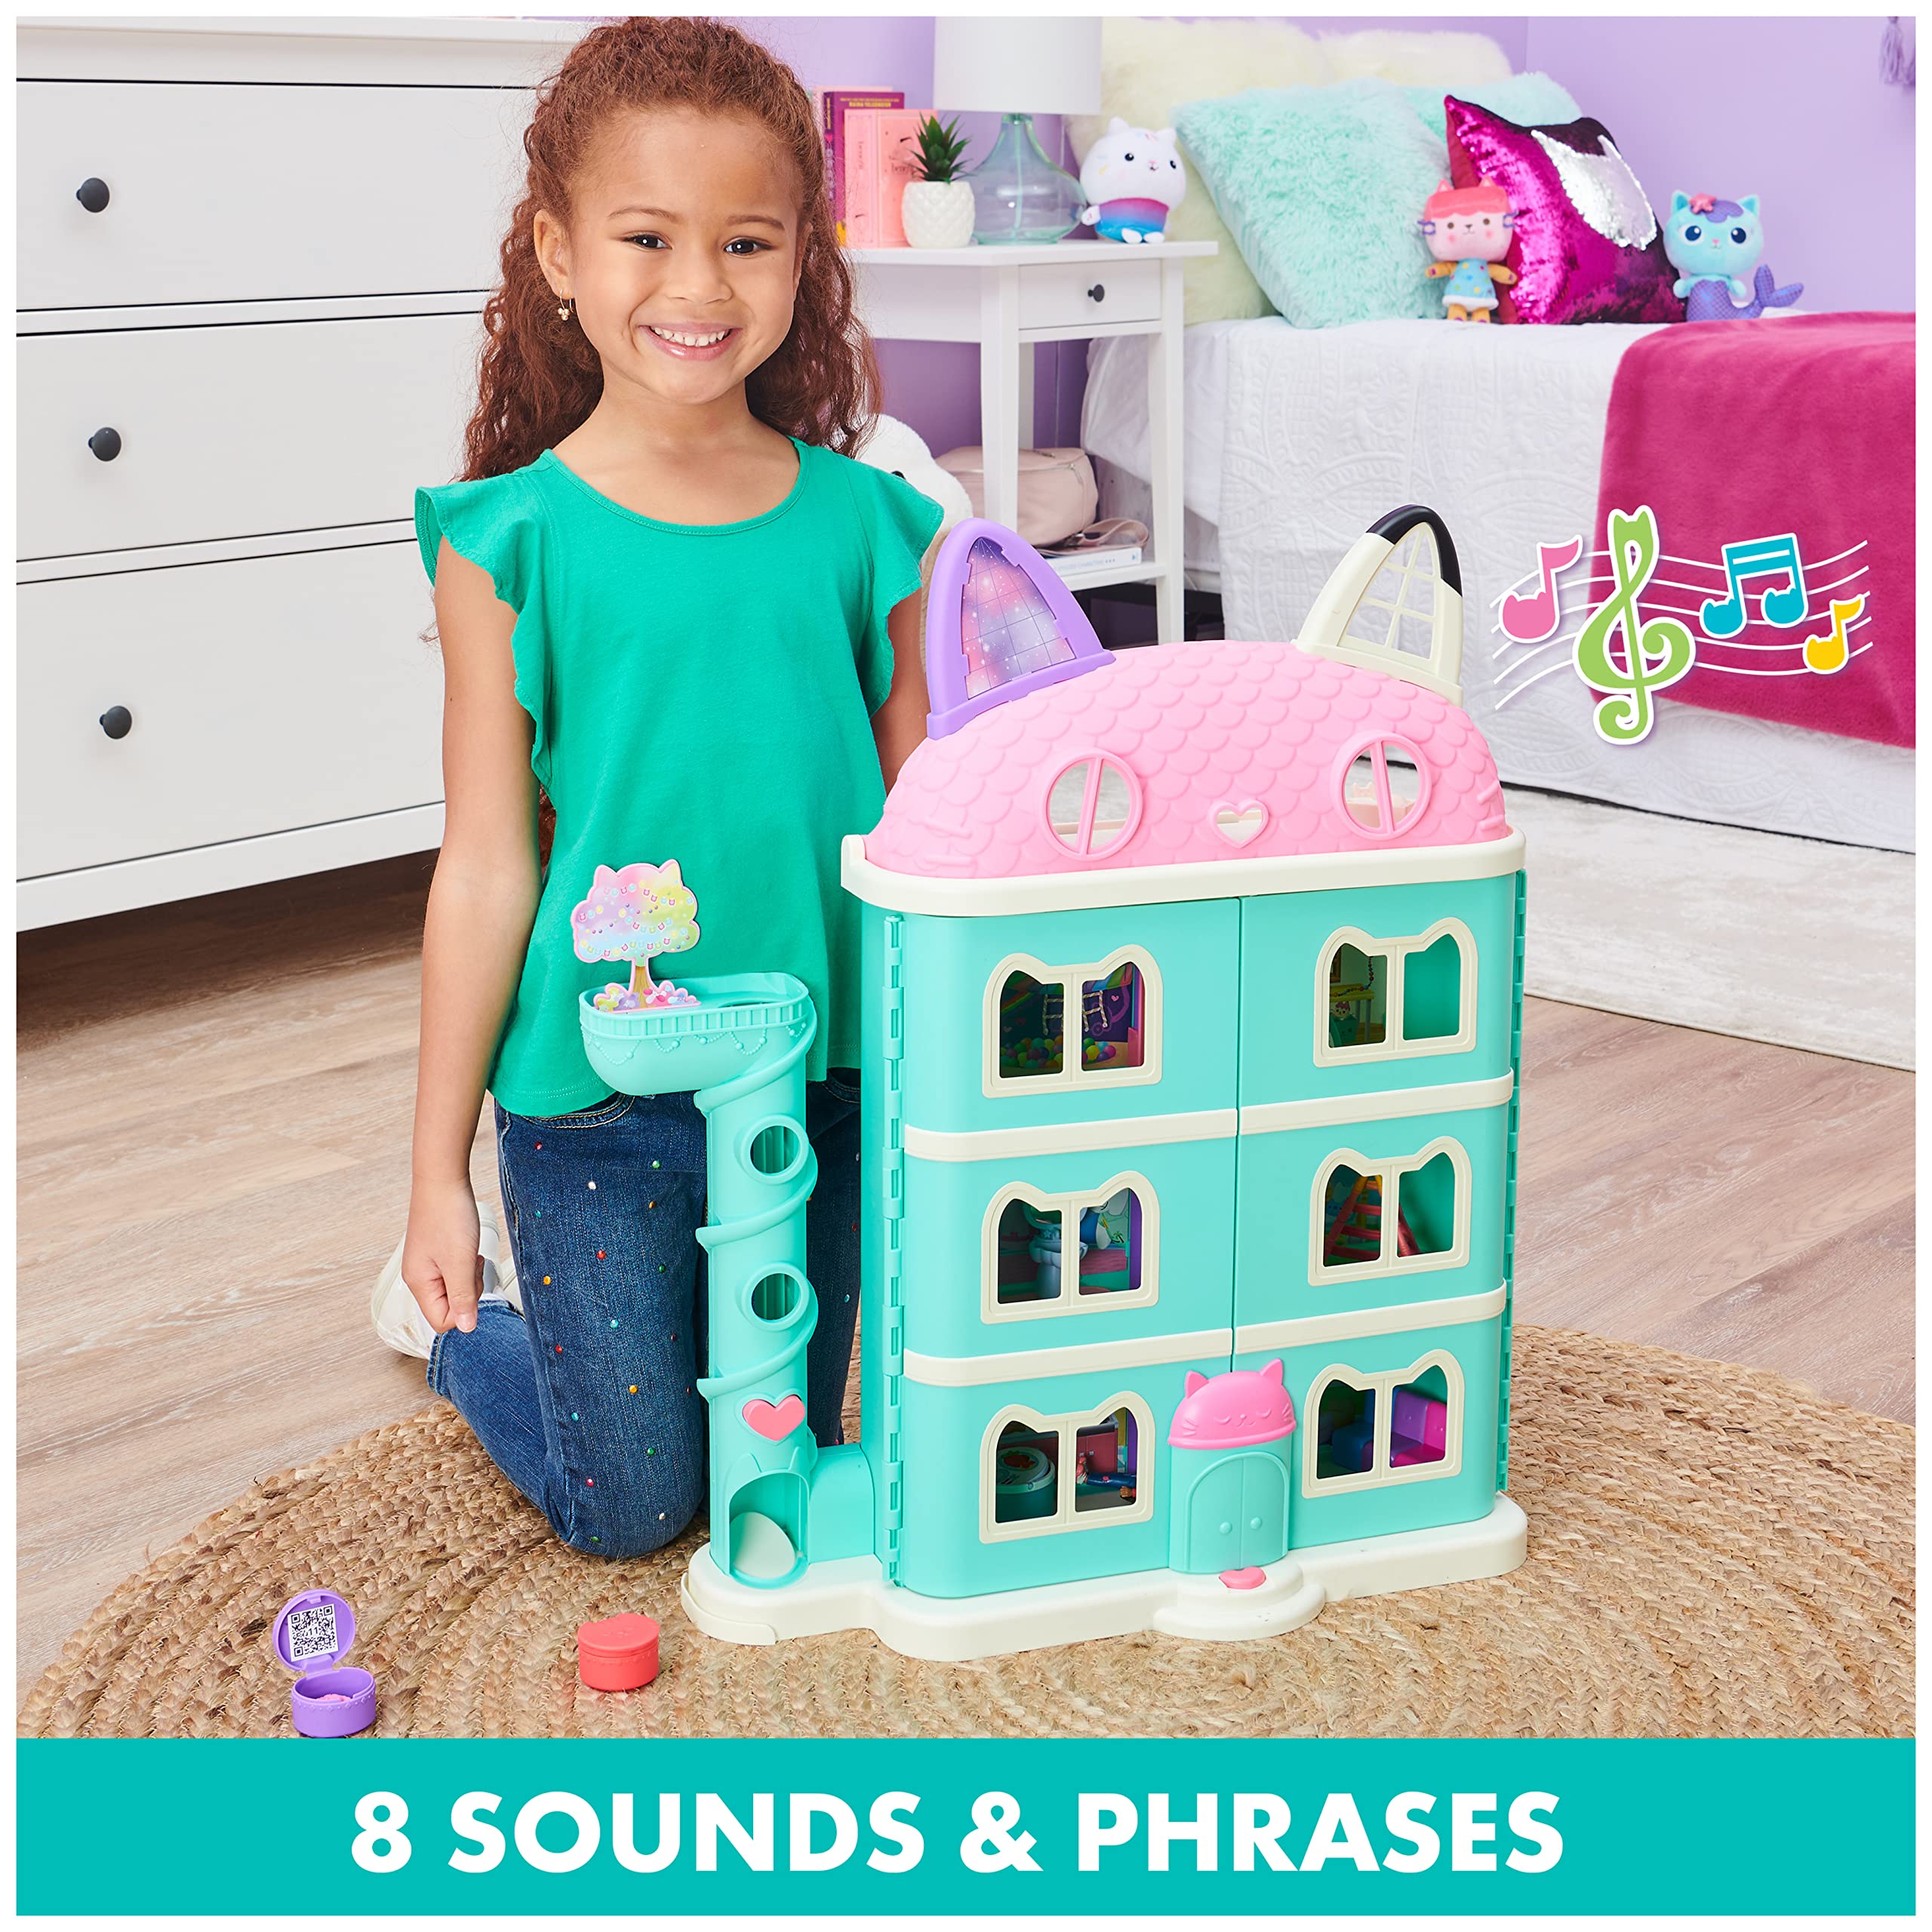 Gabby's Dollhouse, Purrfect Dollhouse with 2 Toy Figures, 8 Furniture Pieces, 3 Accessories, 2 Deliveries and Sounds, Kids Toys for Ages 3 and up